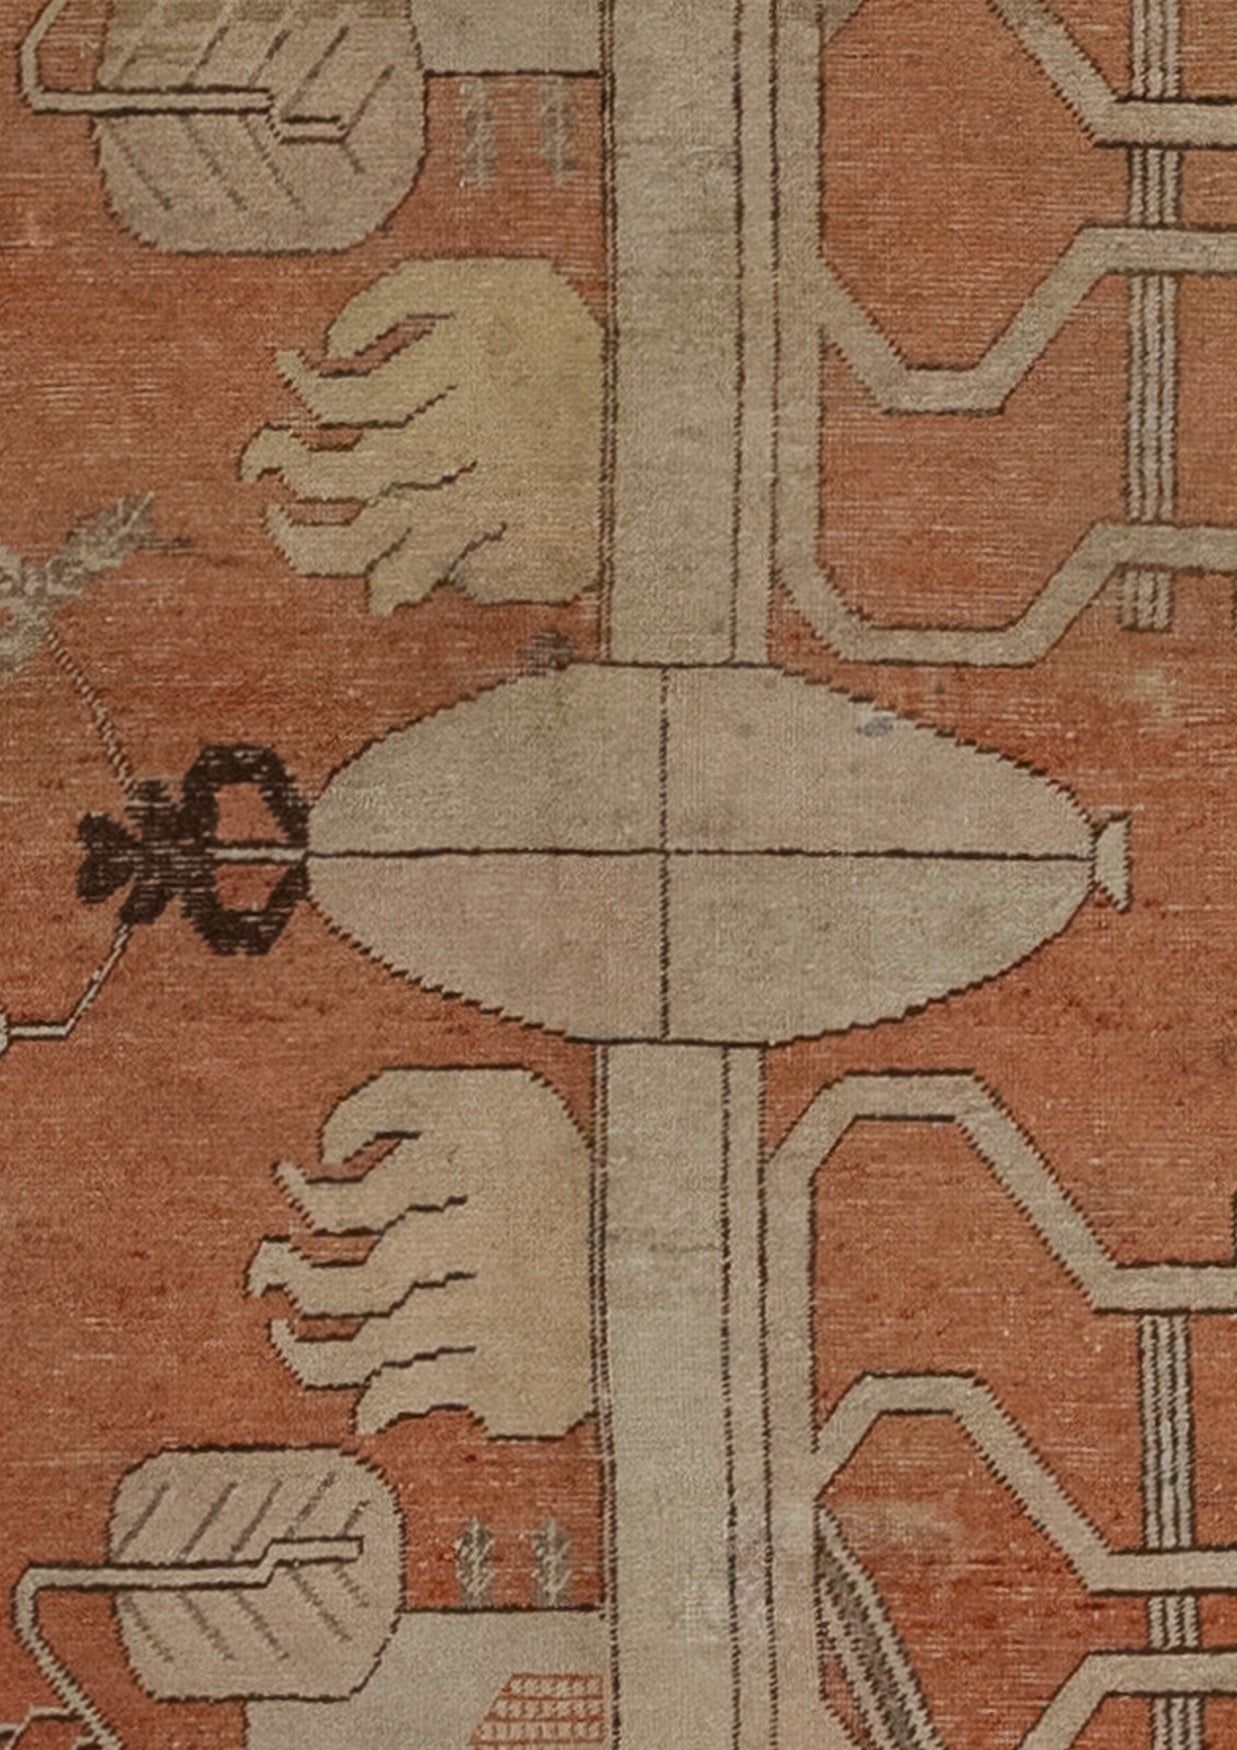 The carpet's close-up displays a central oval unifying the table and makes it symmetrical.